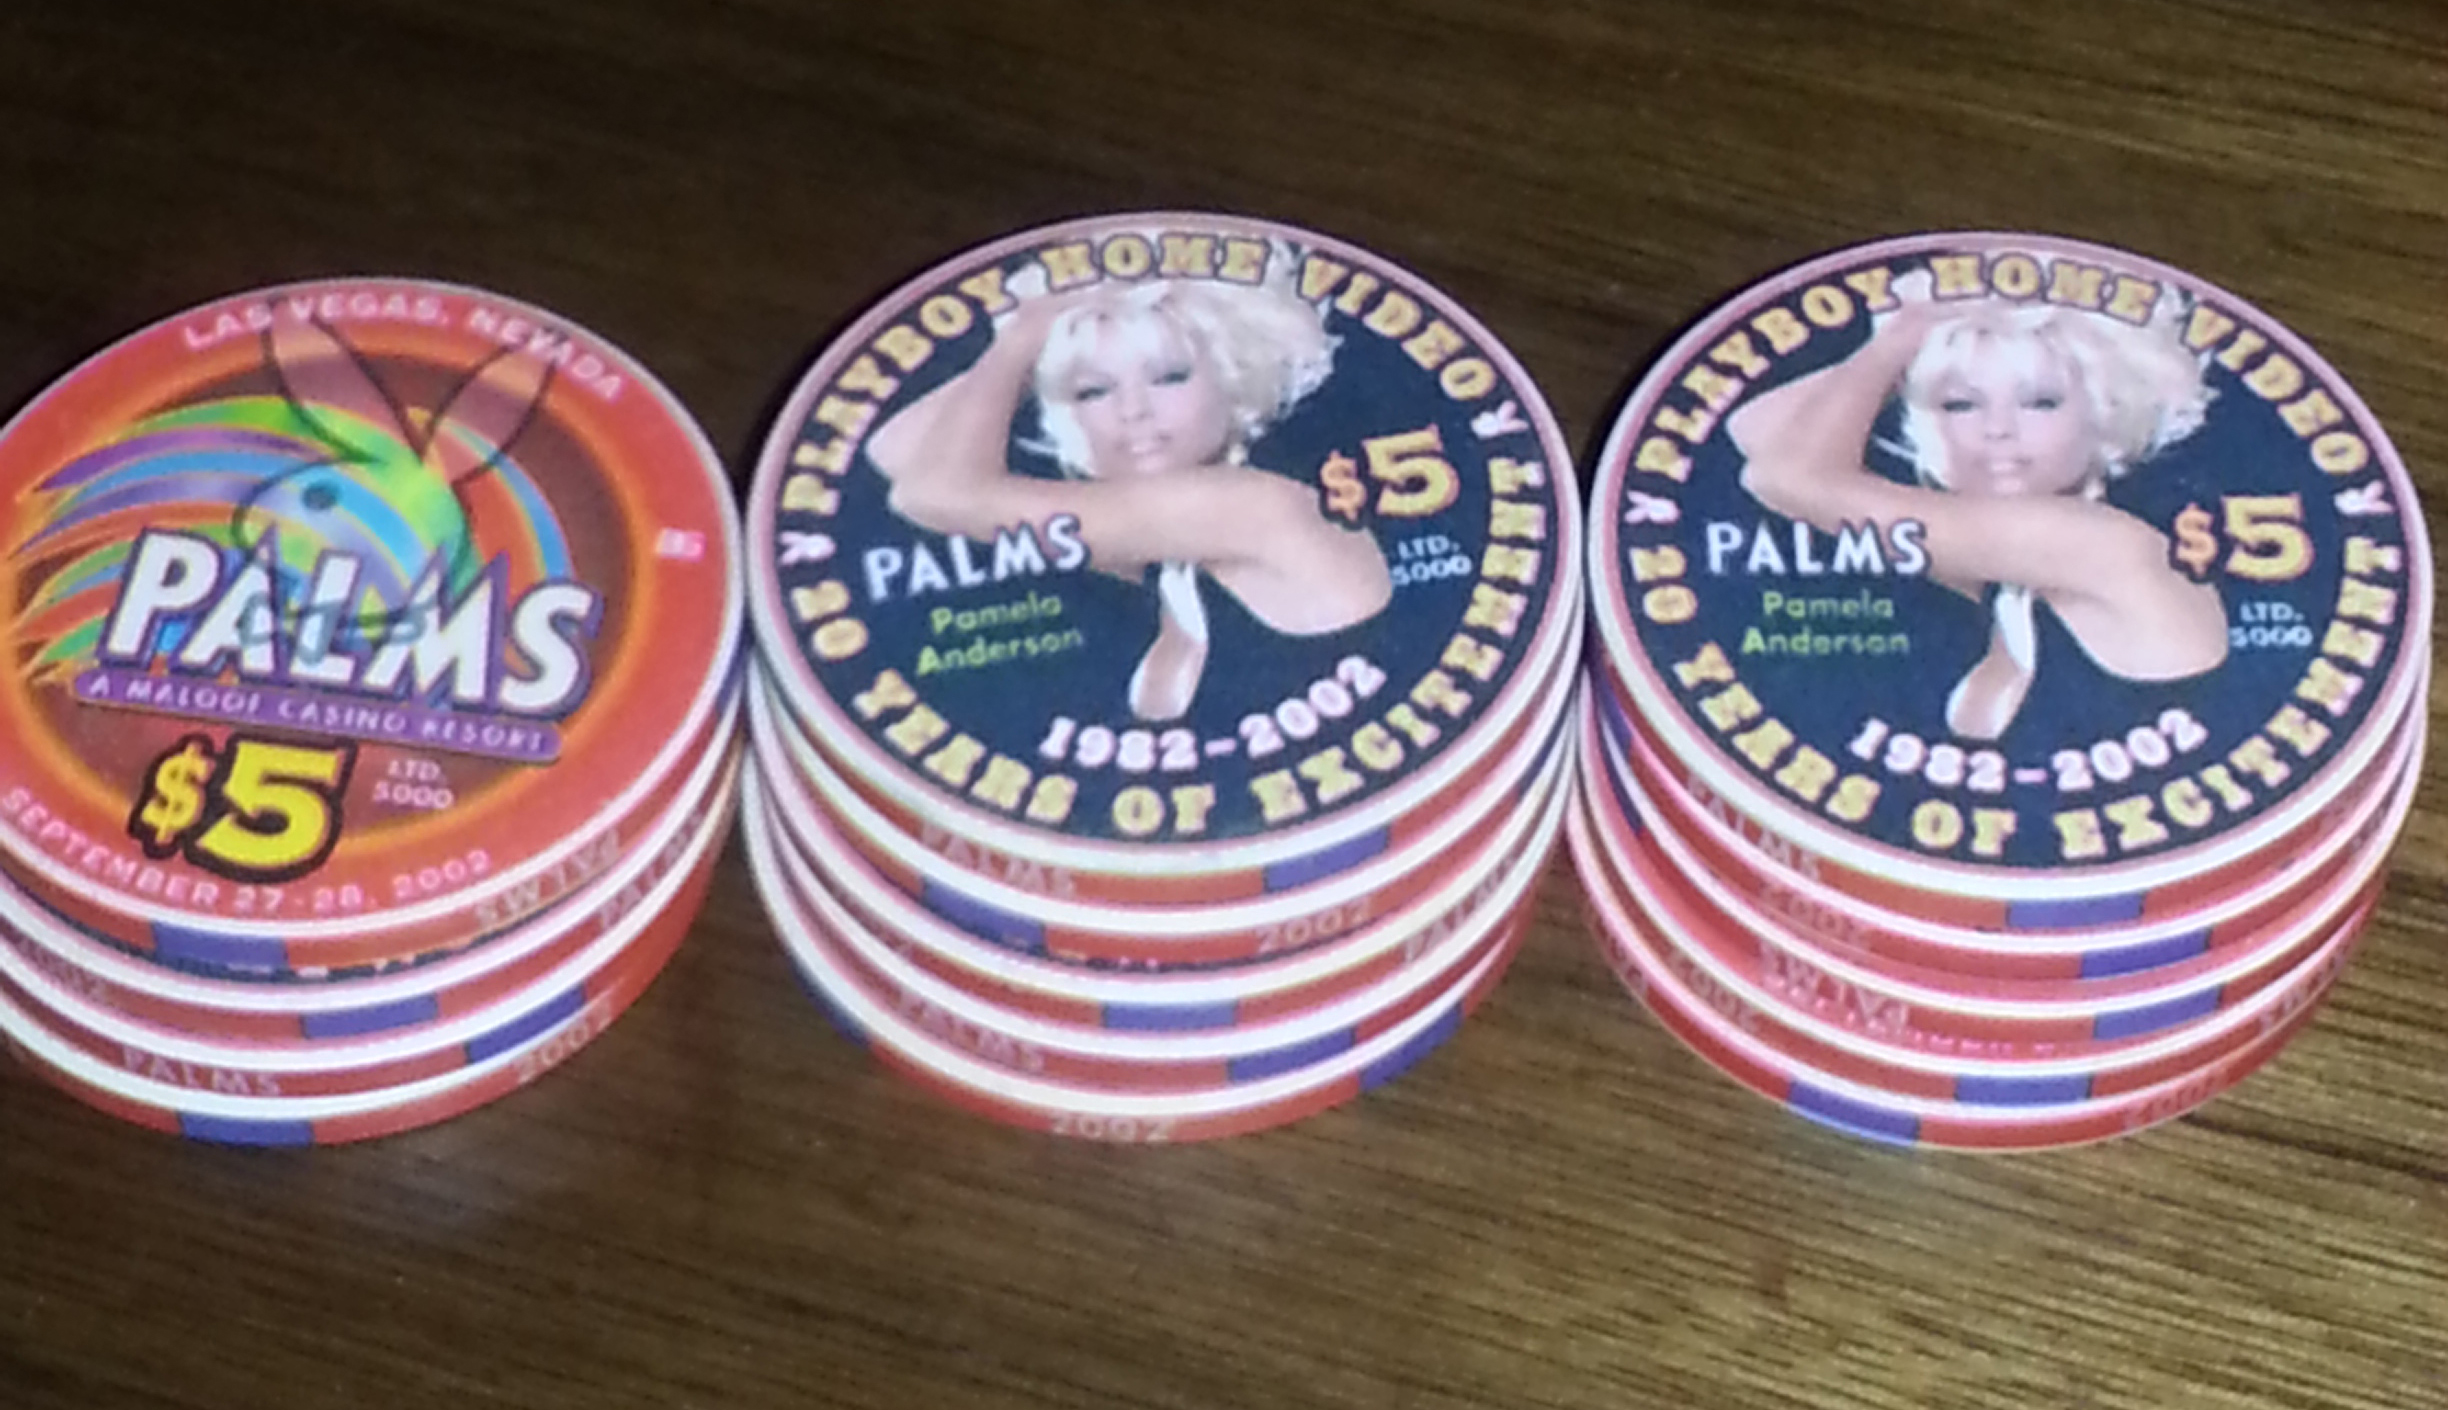 Pamela Anderson $5 Palms Chips from 2002